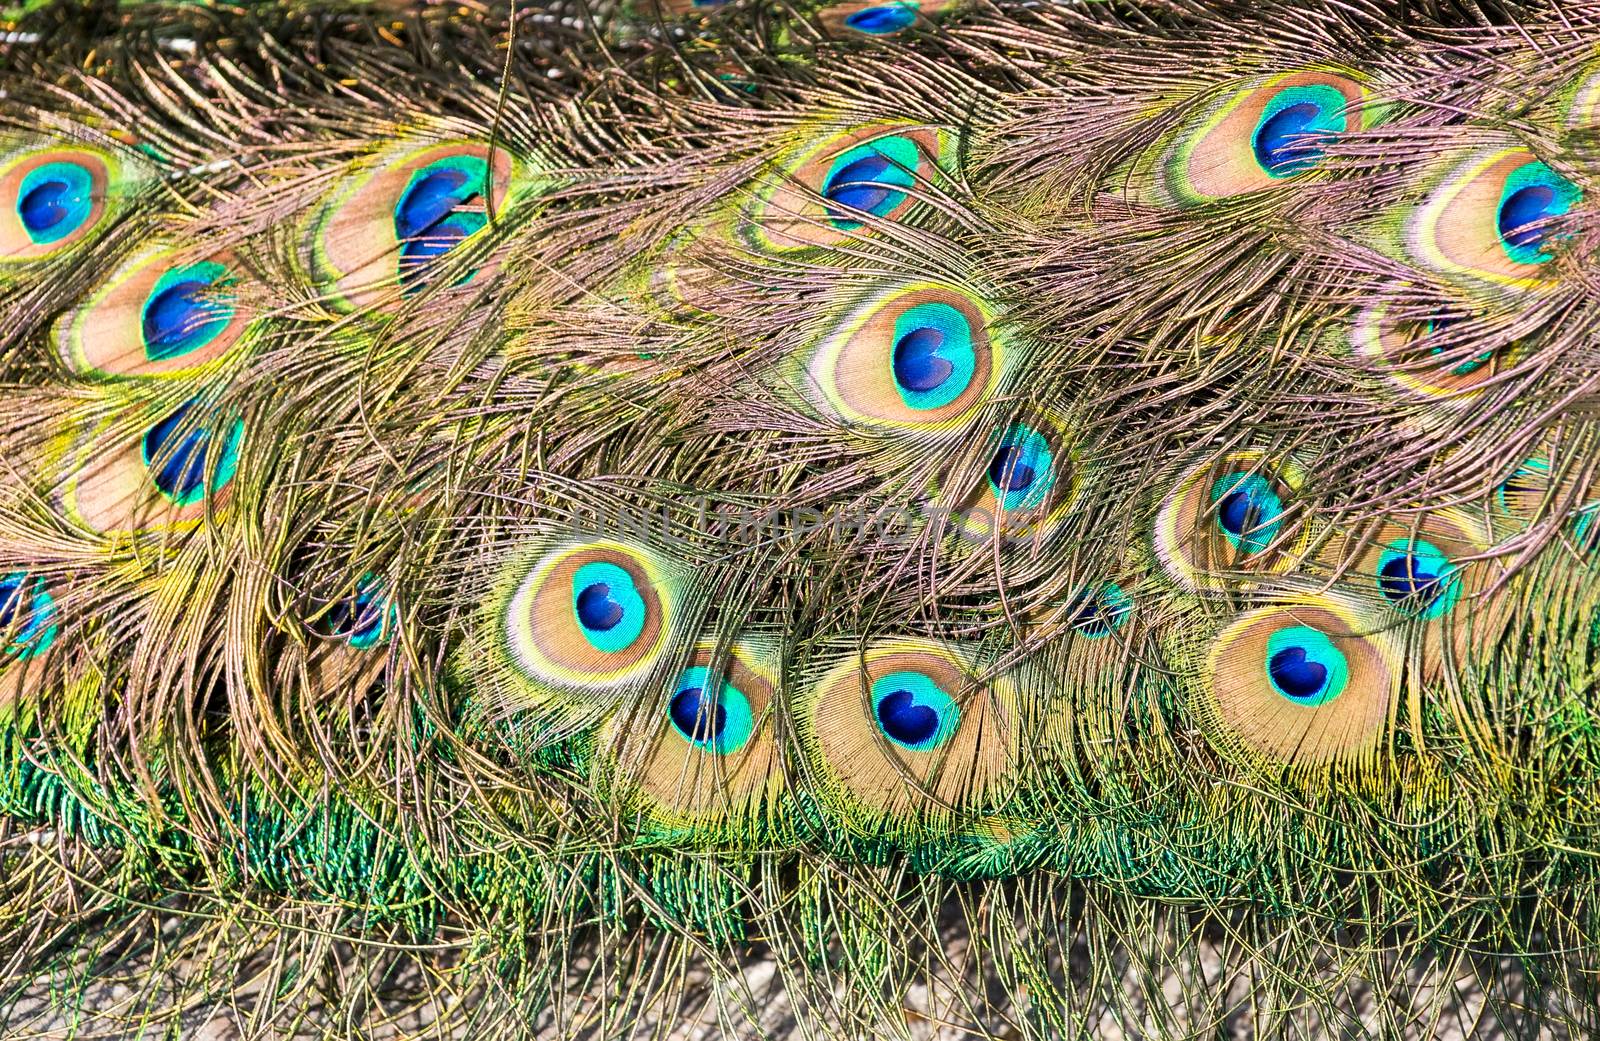 Tail feathers of male peacock by BenSchonewille